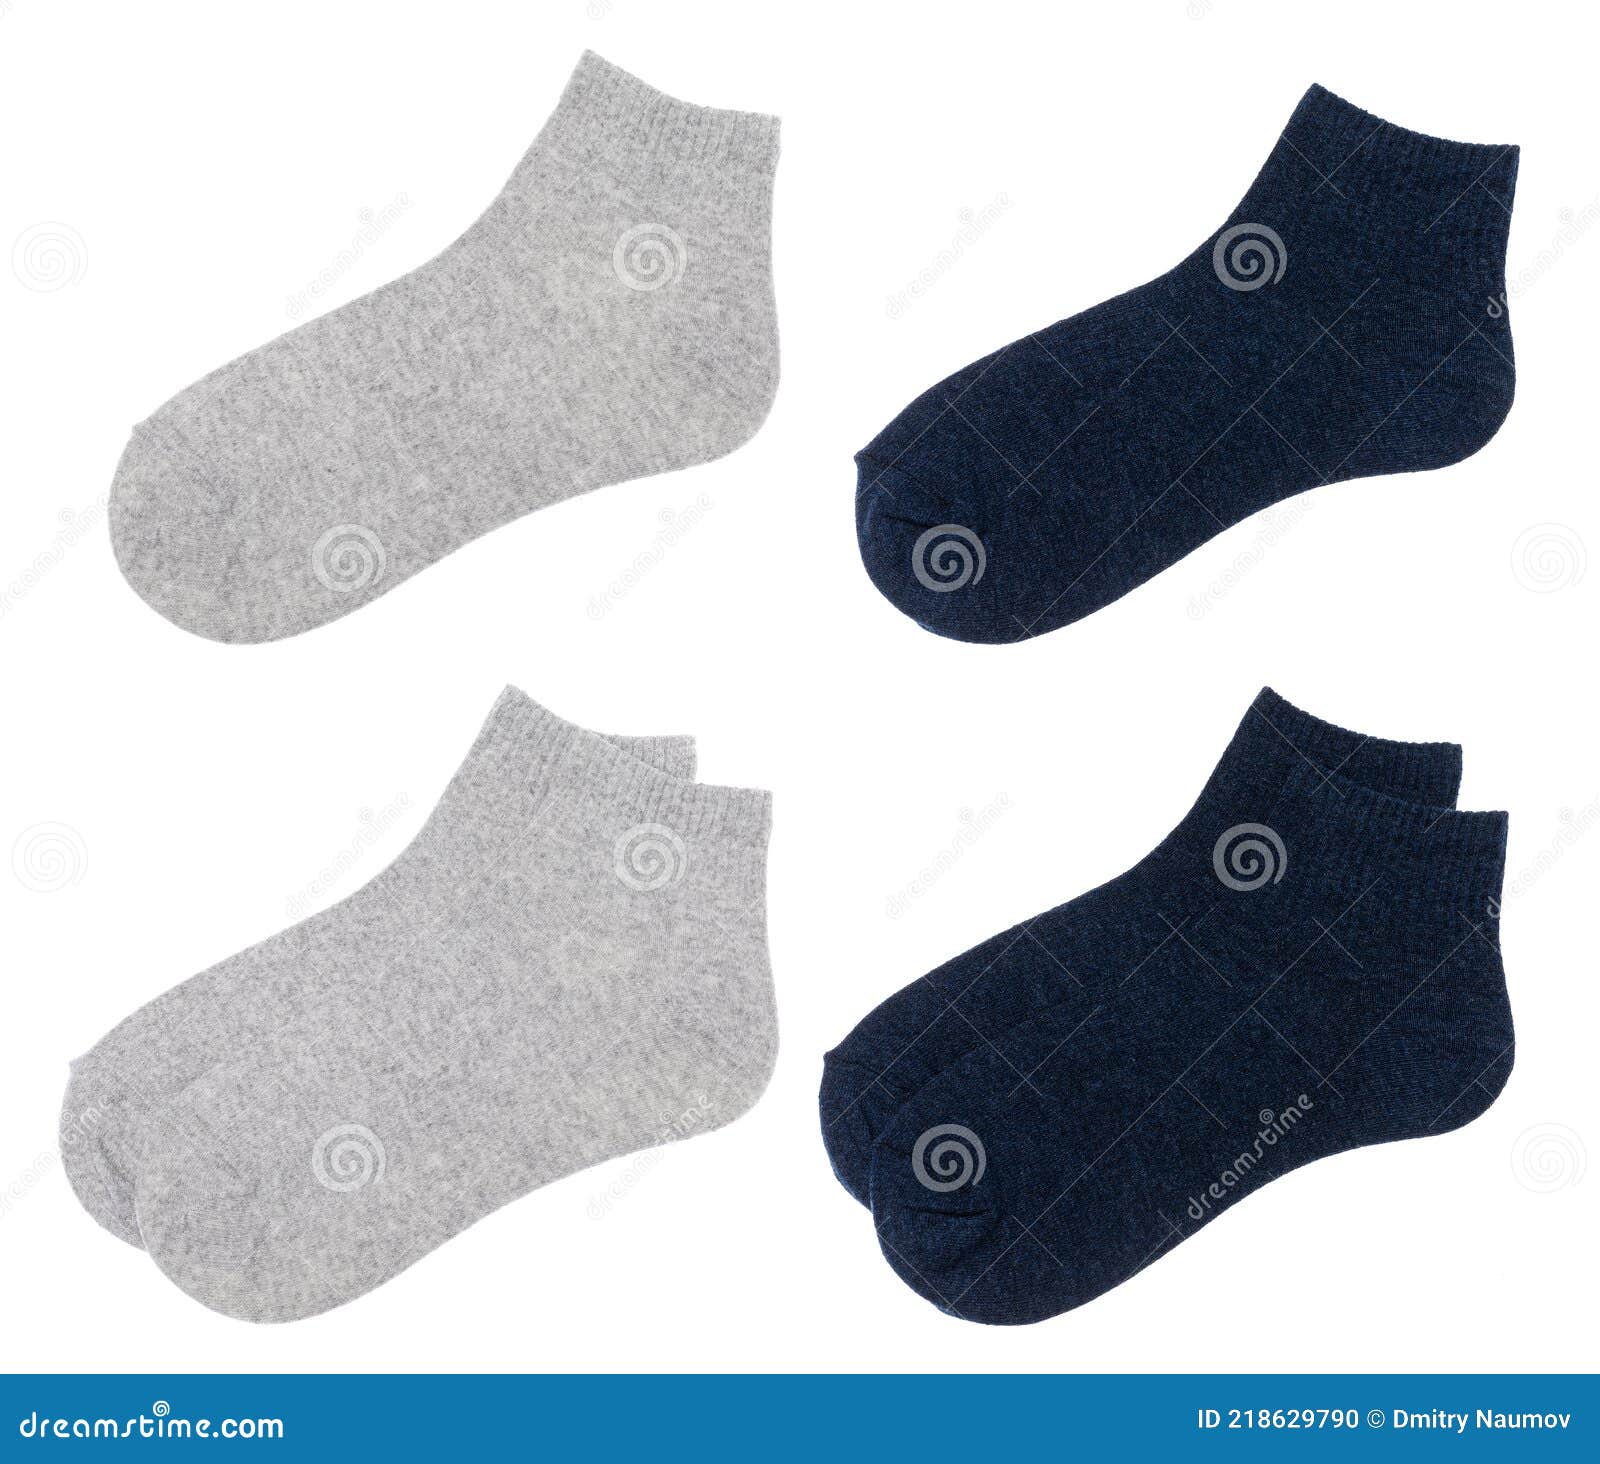 Low Cut Socks Pack Isolated on White Stock Photo - Image of cotton ...